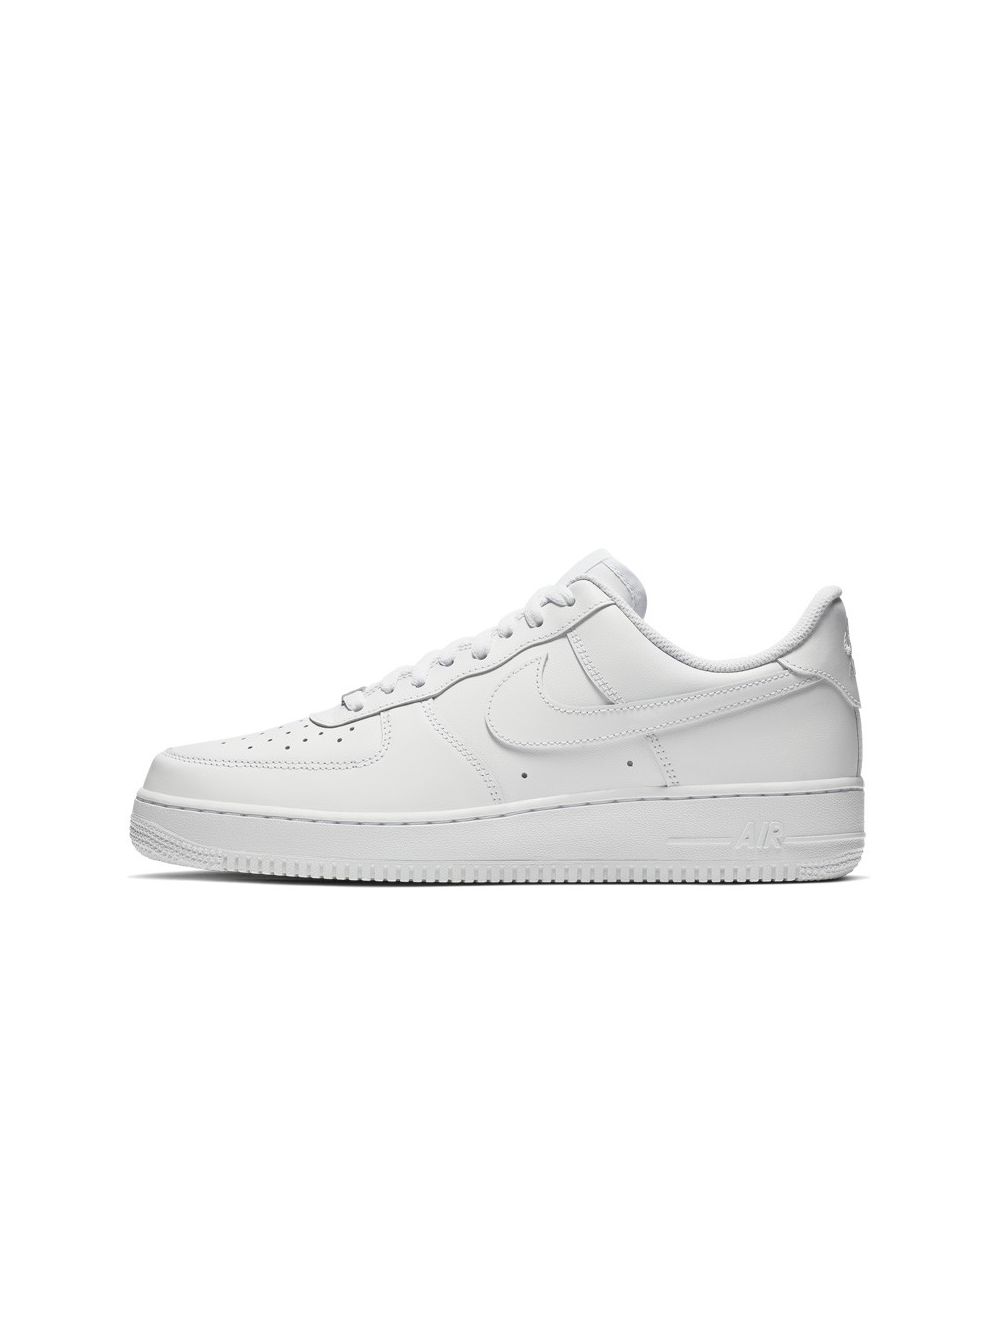 air force 1 5.5 youth white